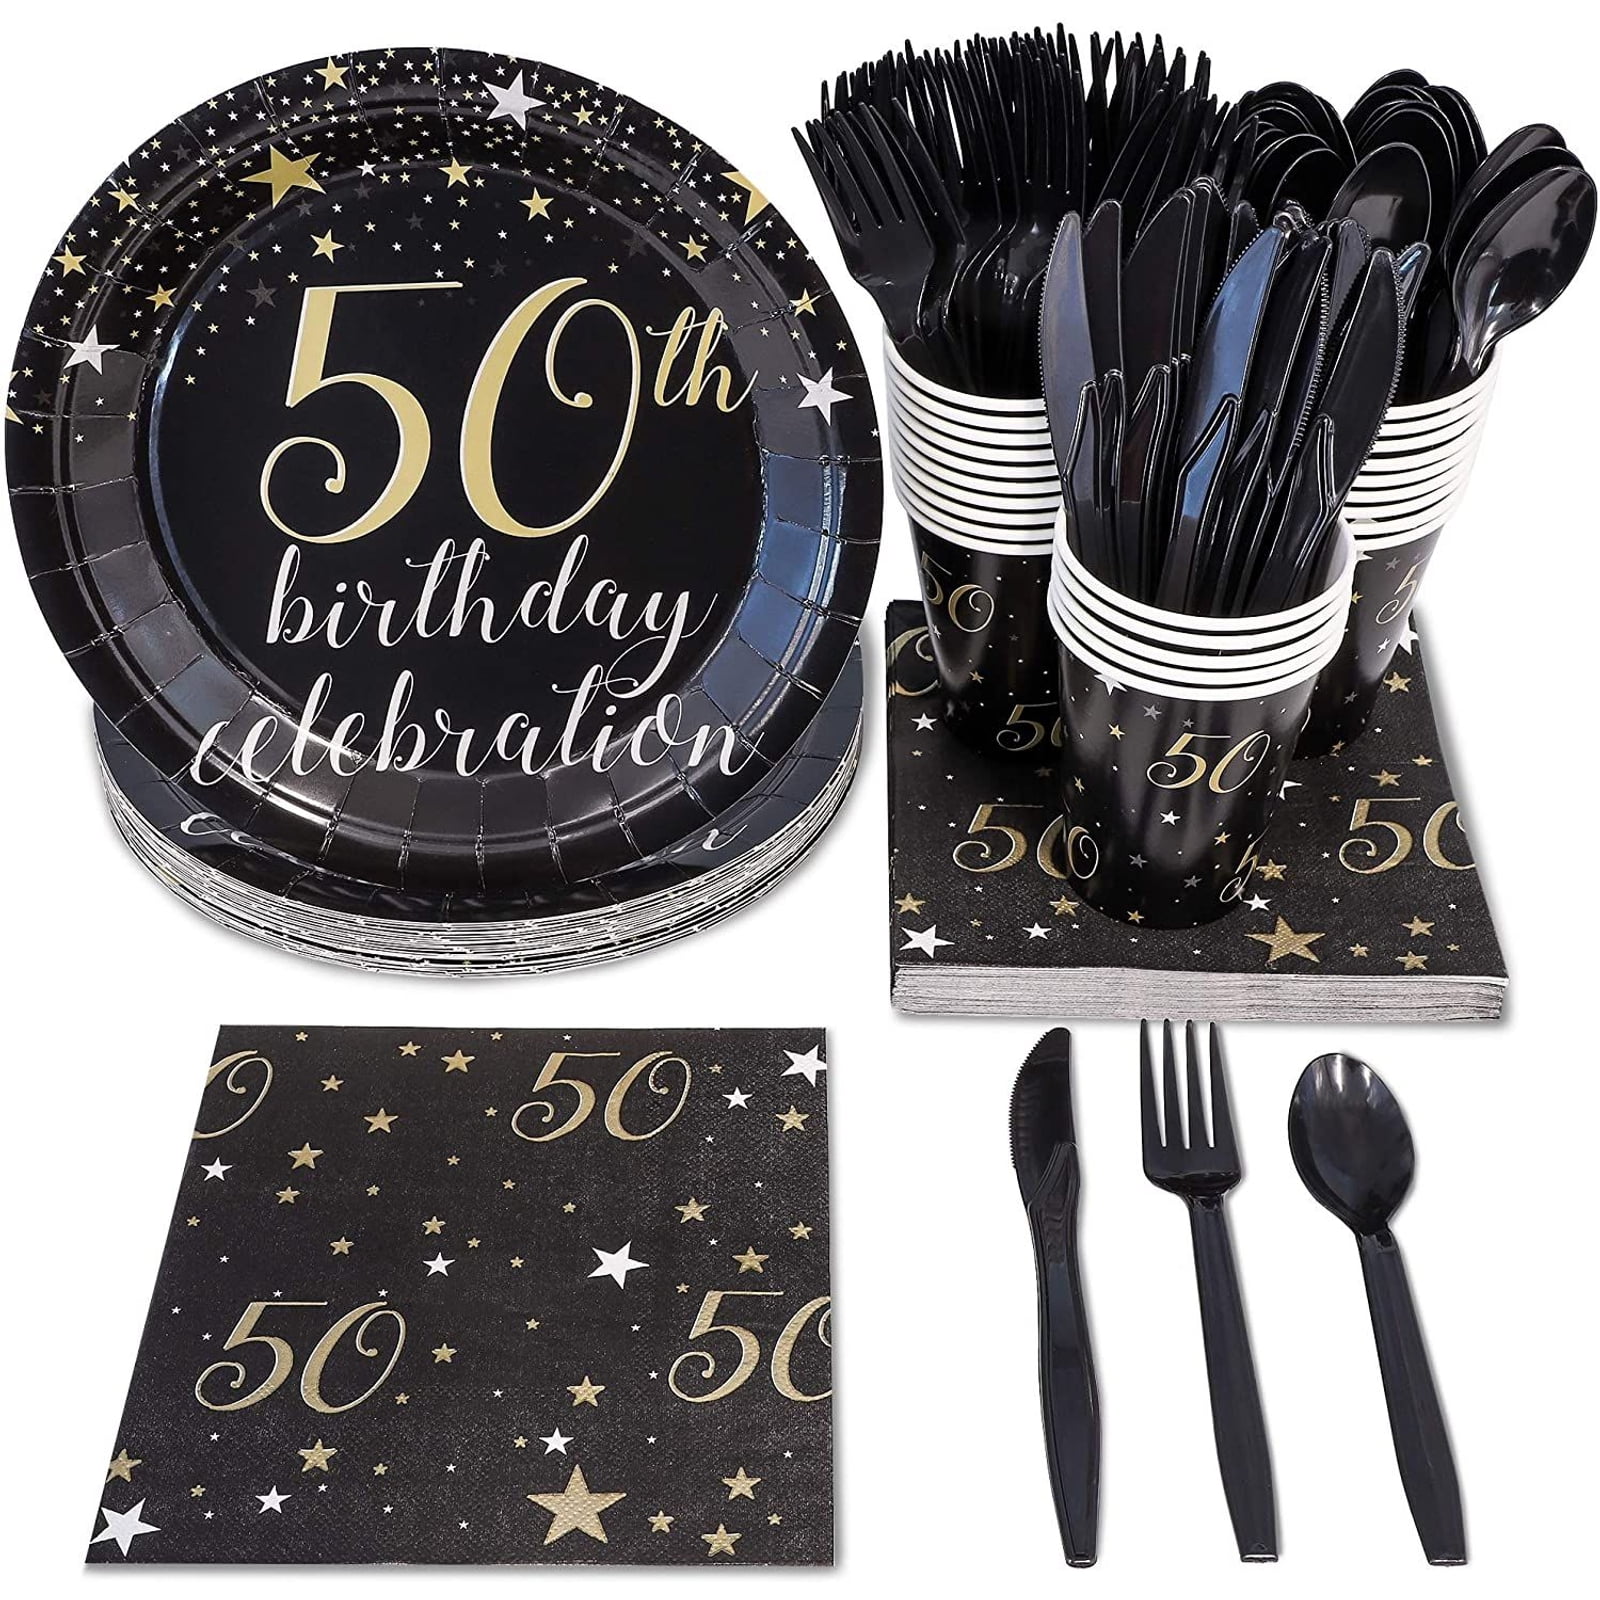 Akamino Black and Gold Party Supplies Set for 25 Guests 127PCS Golden Dot Party Tableware Includes Tablecloth & Banner Party Paper Plates Cups Straws Napkins for for Birthday Decorations Weddings